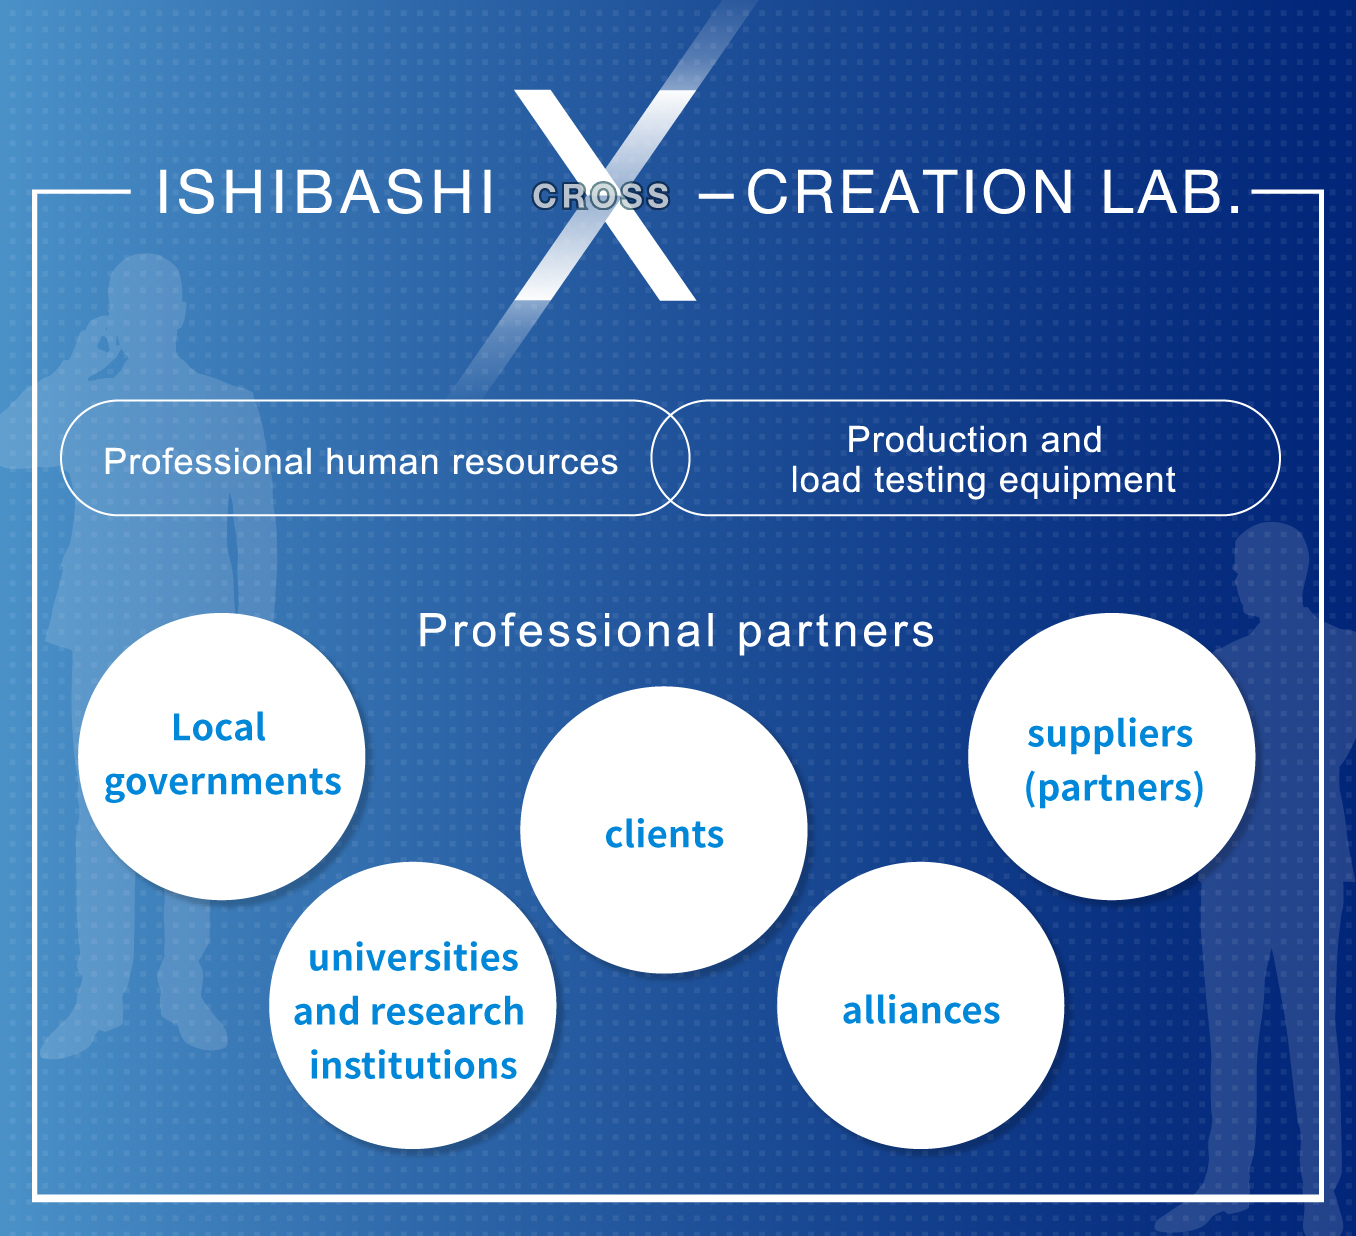 ISHIBASHI X-CREATION LAB.,Professional human resources,Production and load testing equipment,Professional partners,Local governments, universities and research institutions,clients, alliances, suppliers (partners)